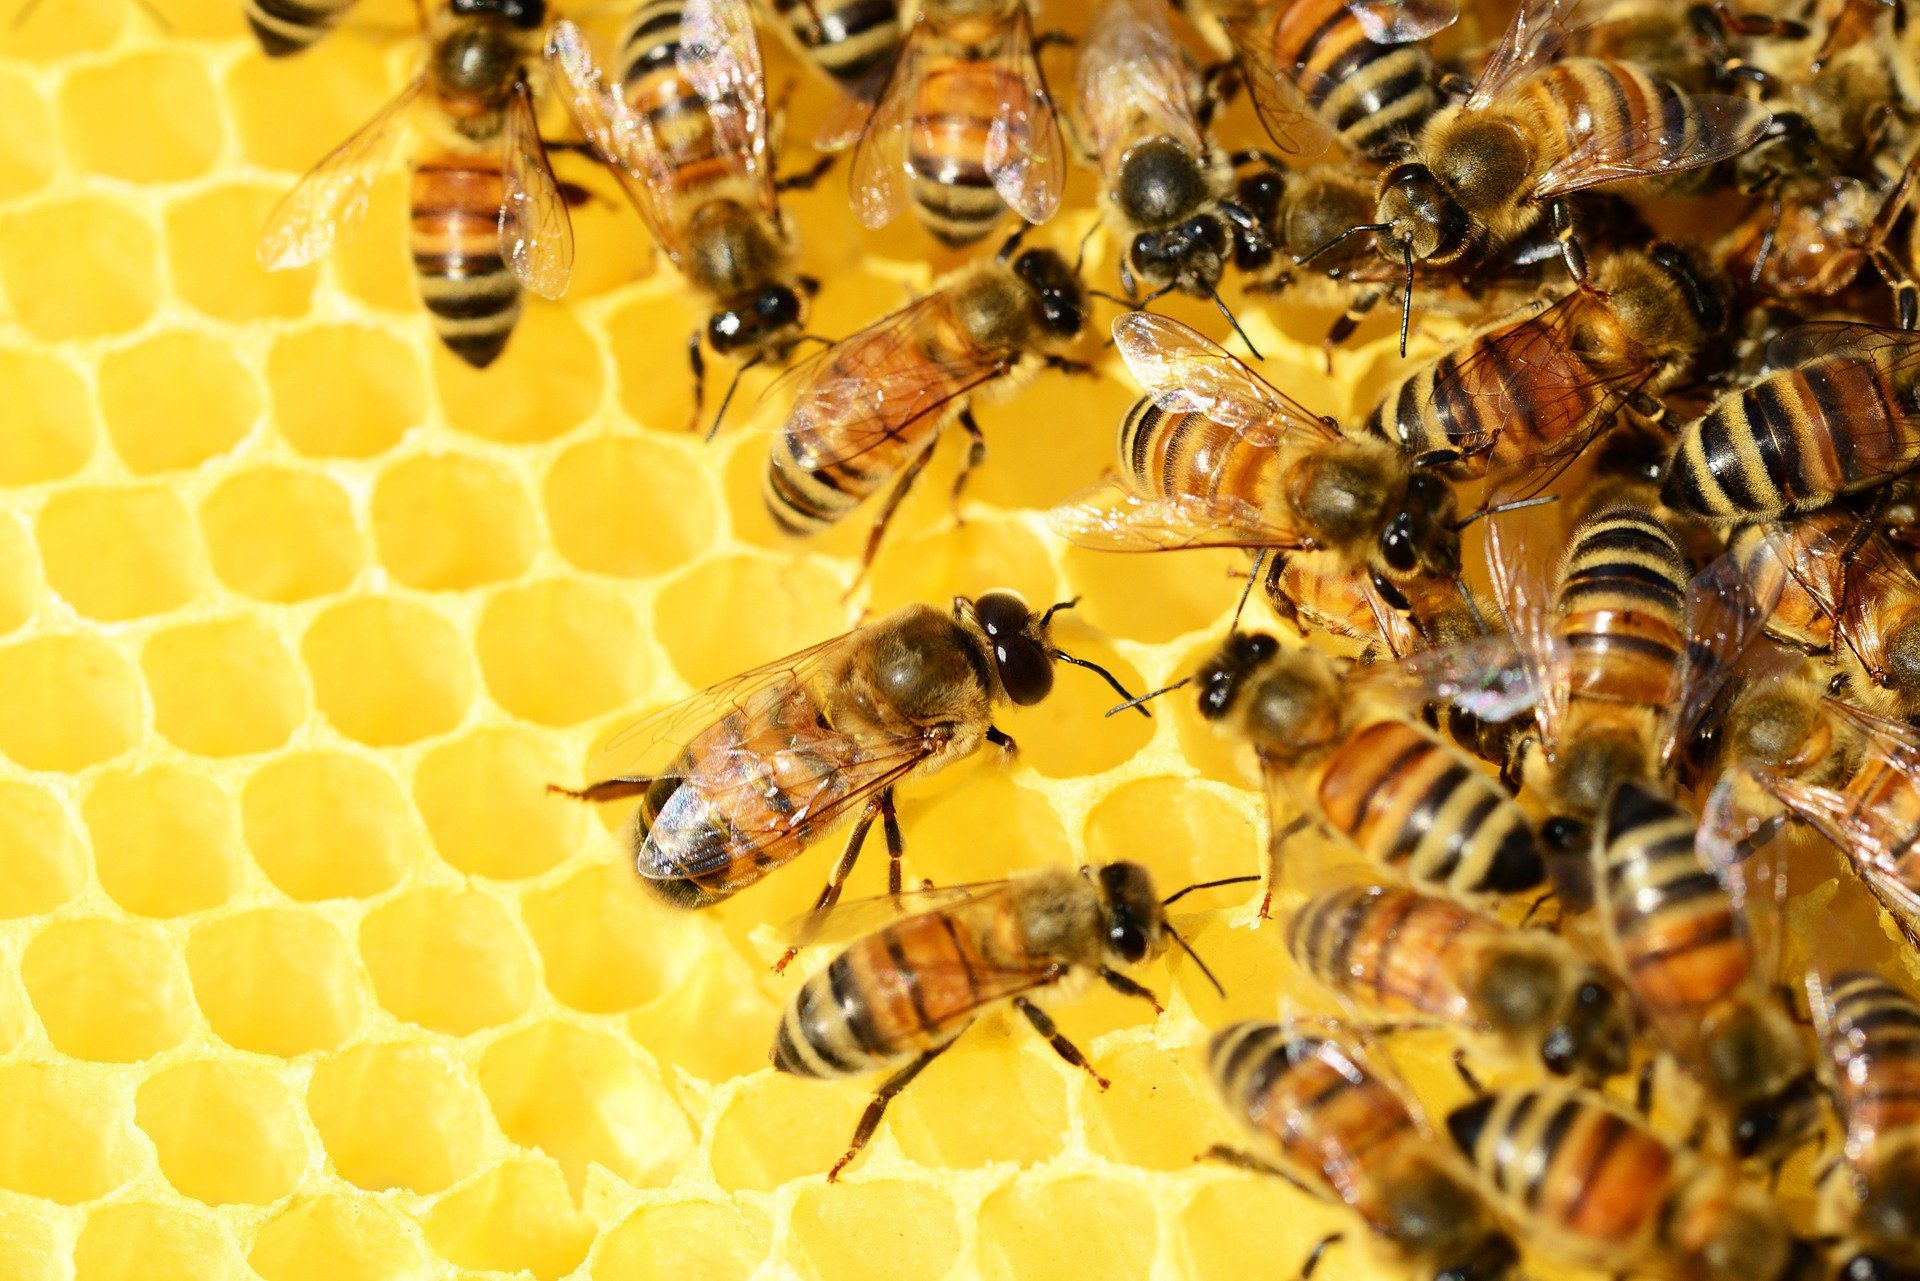 Bees together on honeycomb